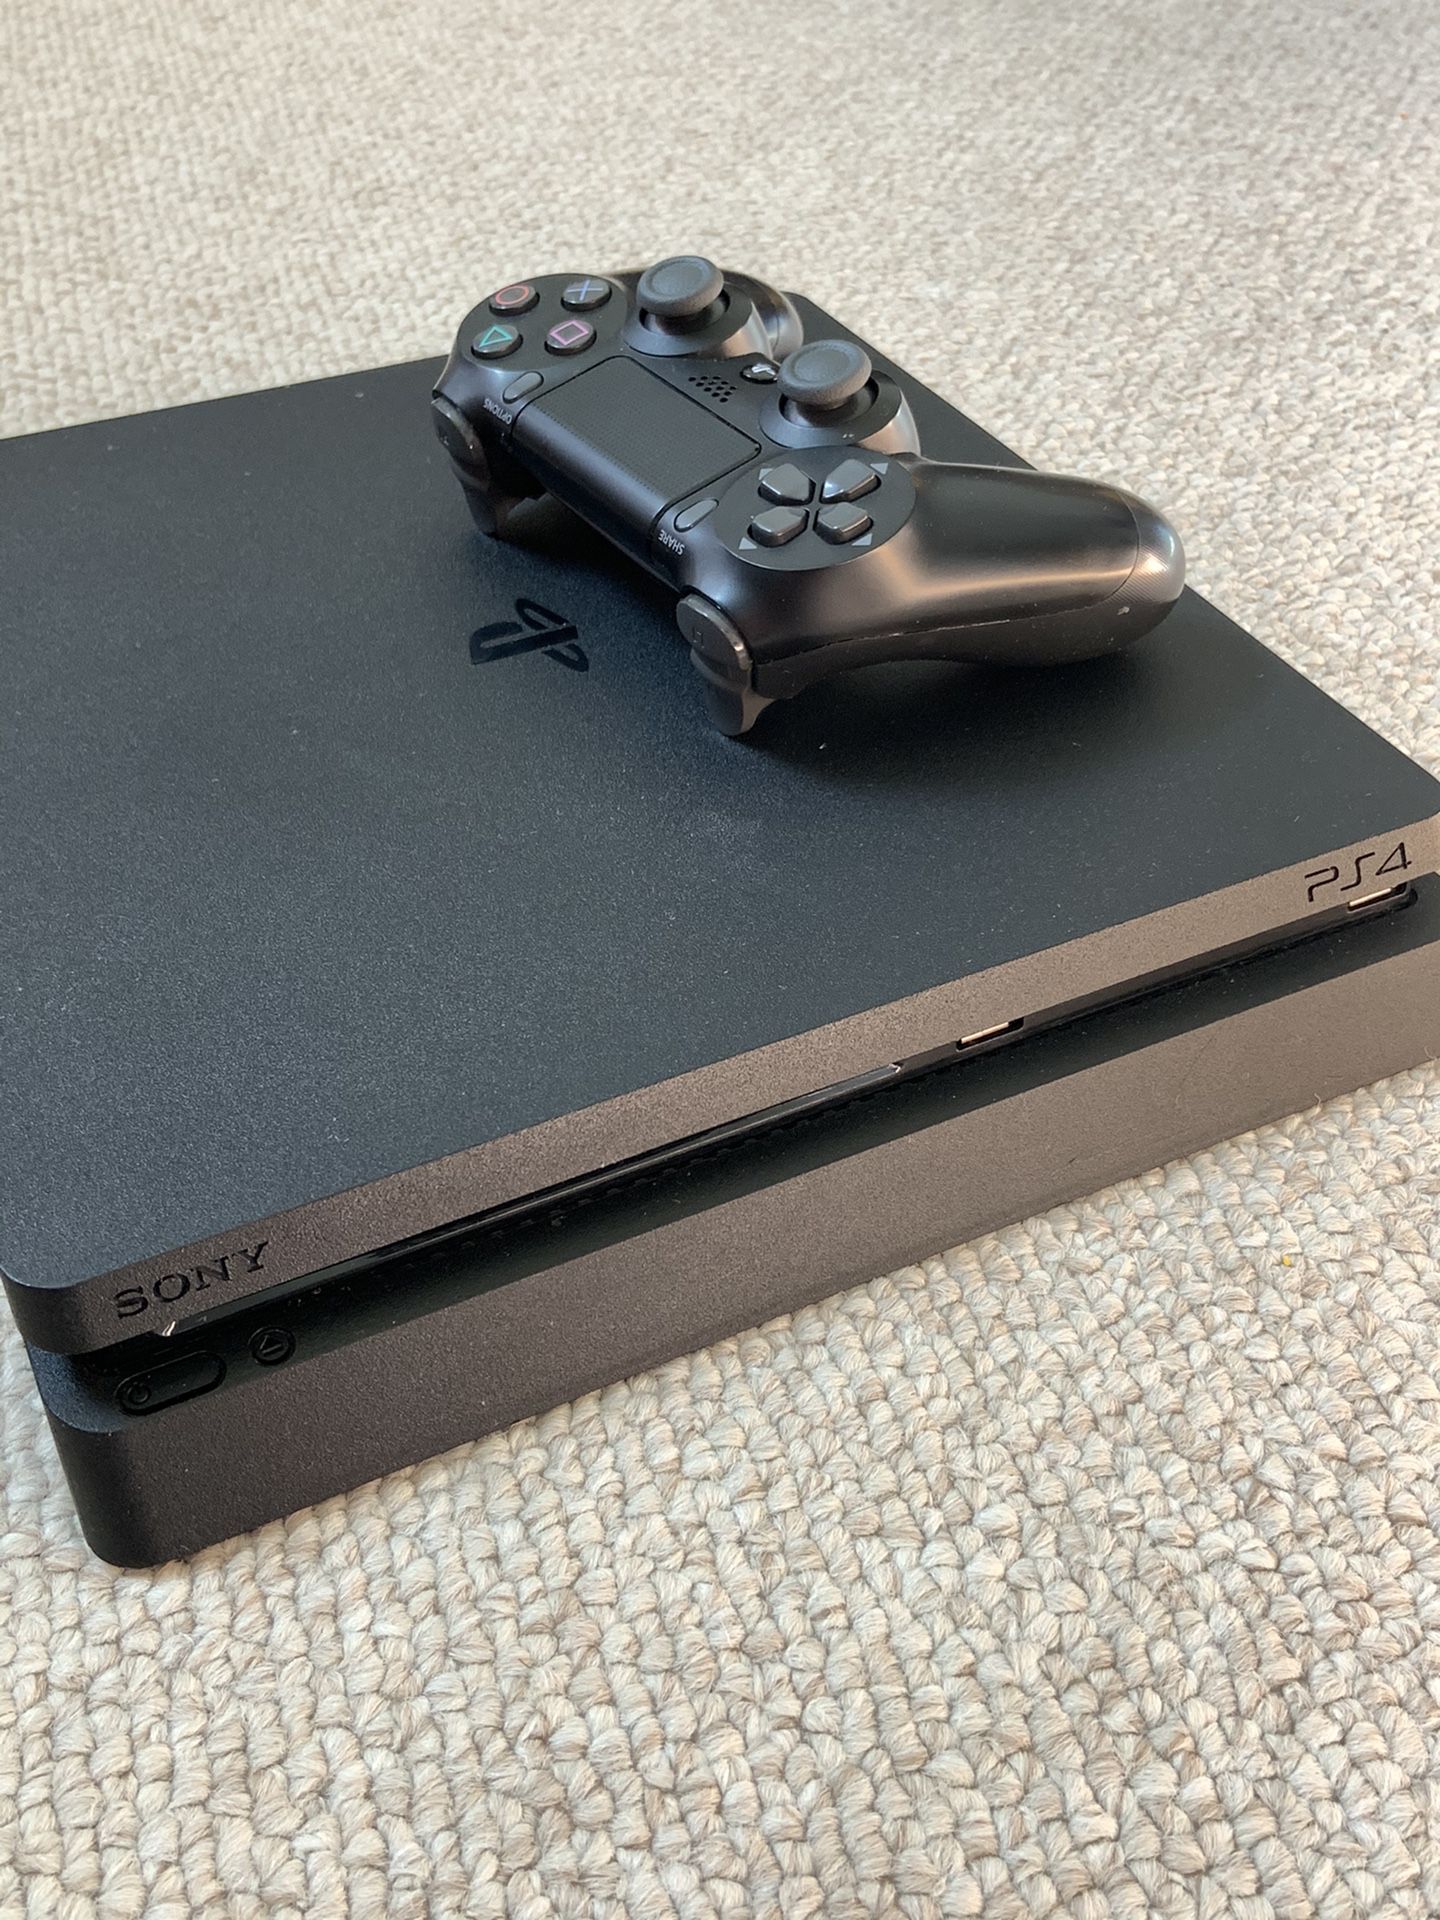 PS4 Slim (available if posted)